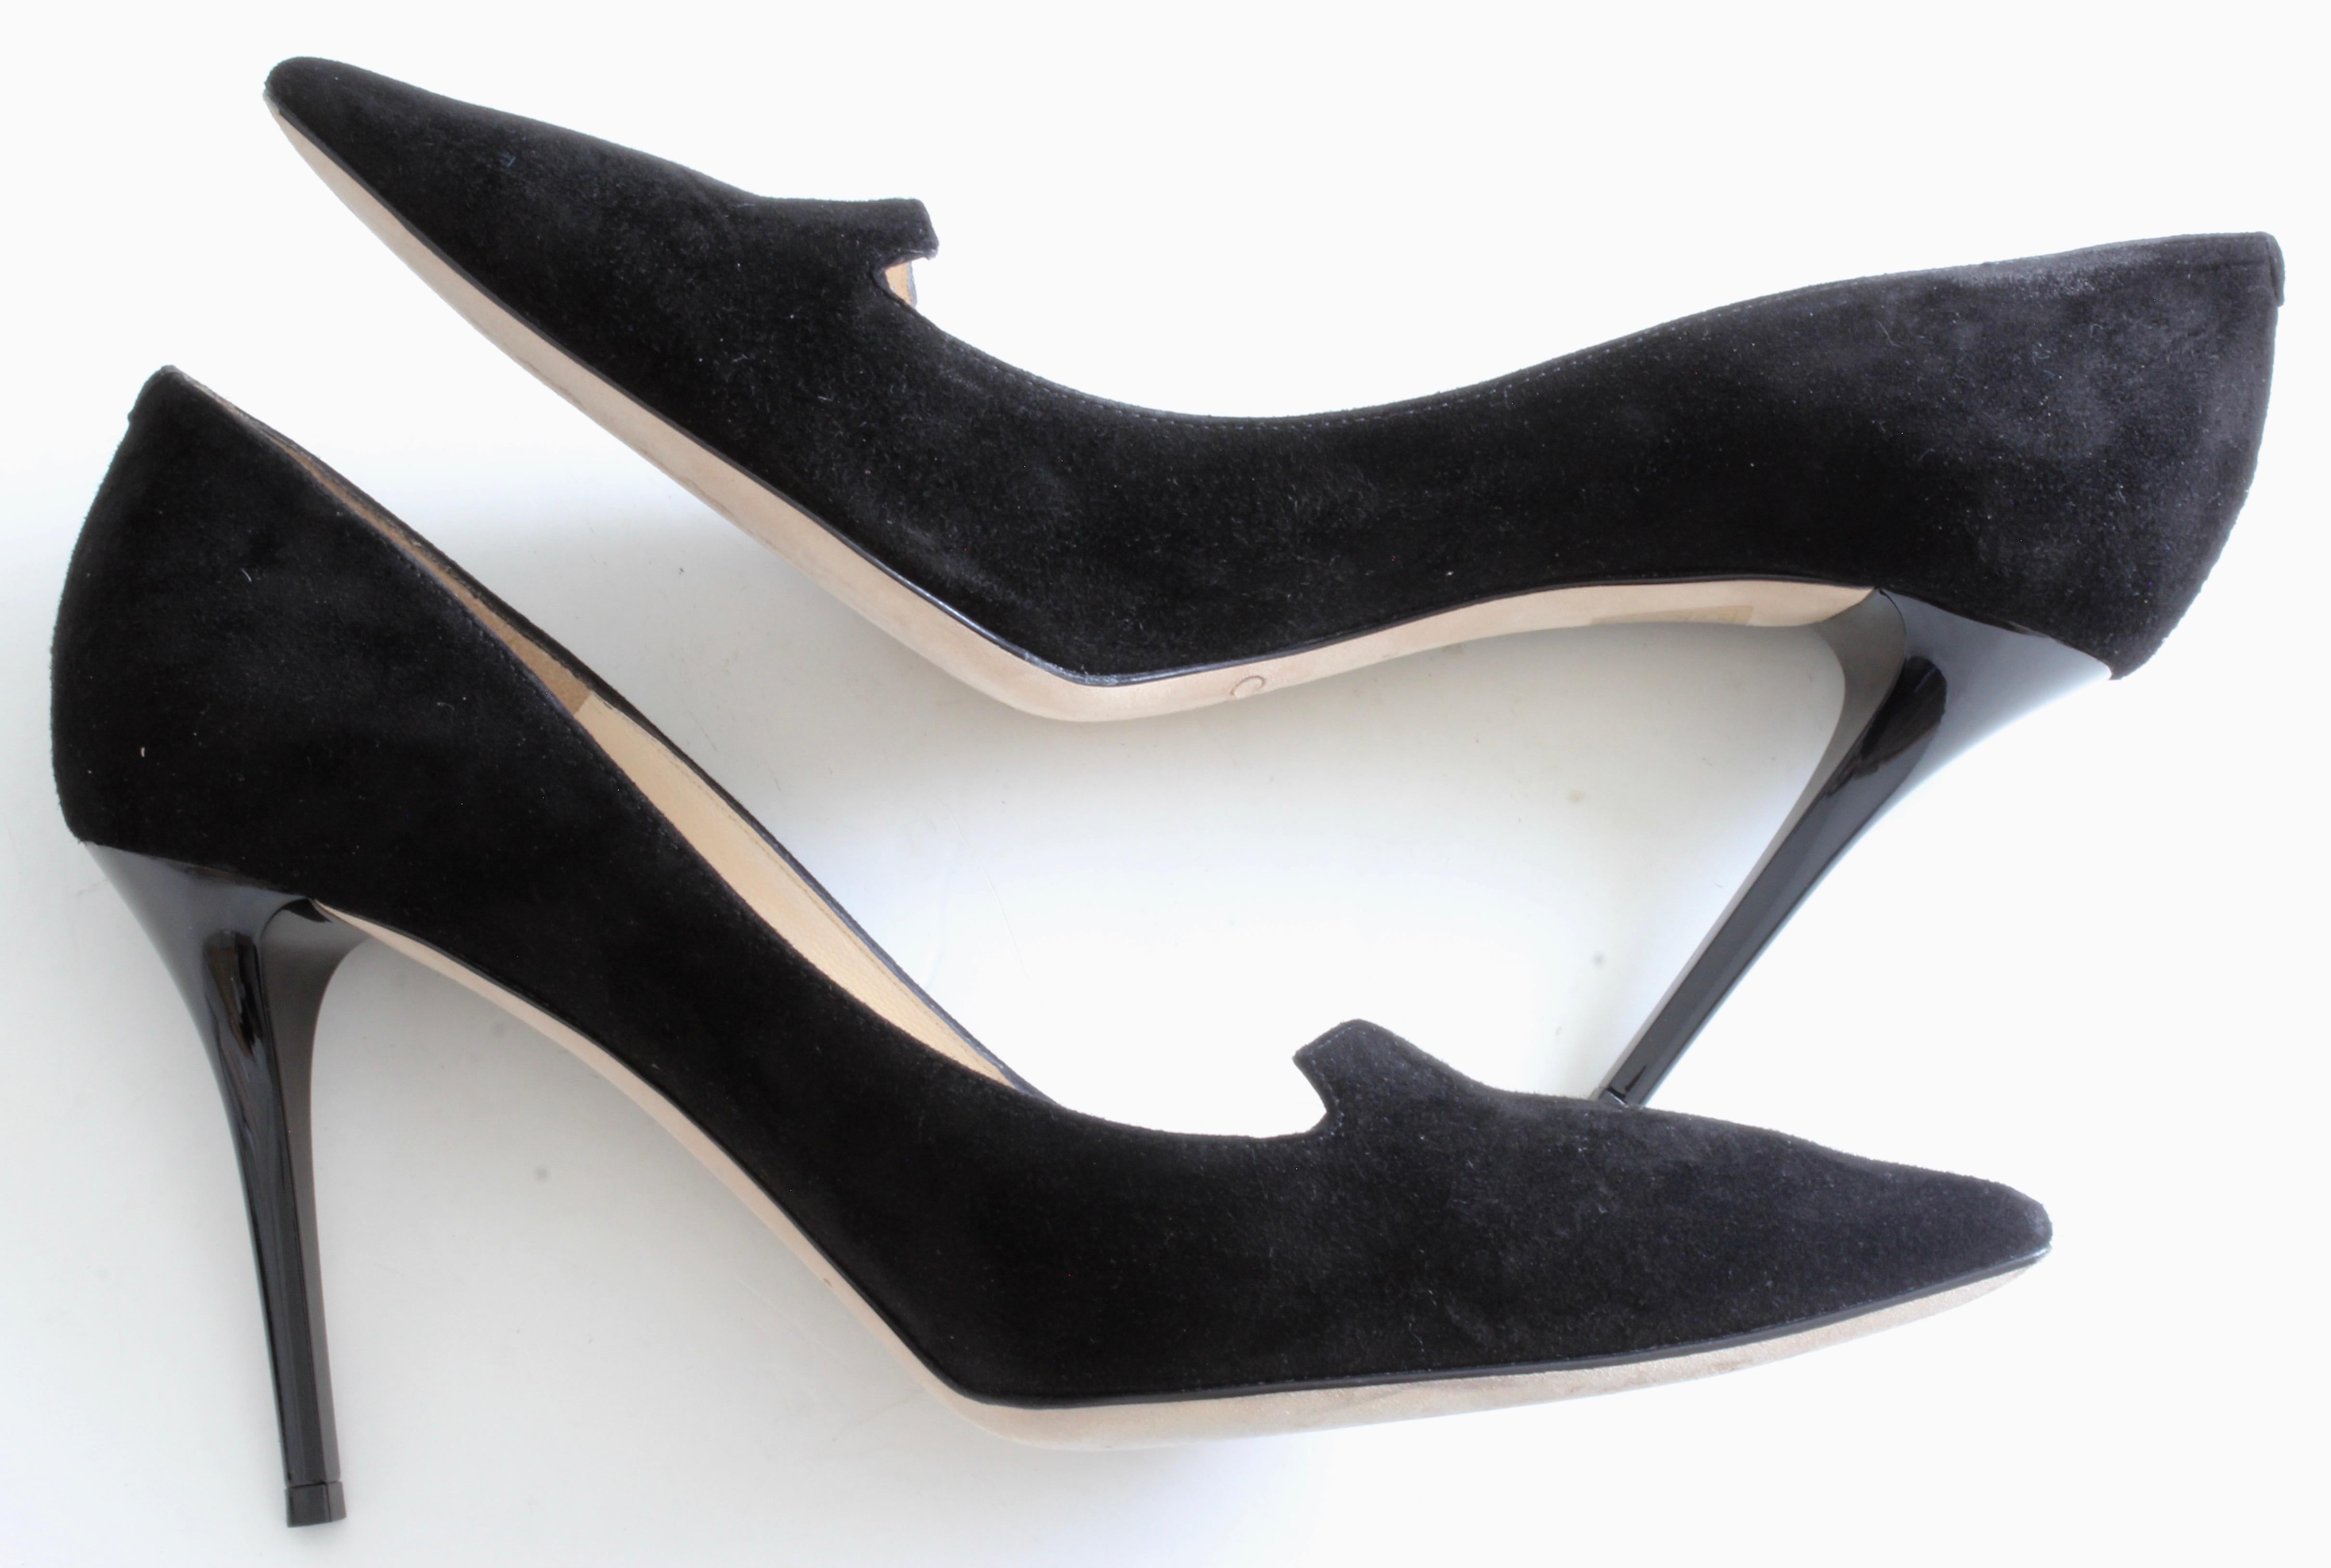 Jimmy Choo Heels Black Stiletto Pumps 247 Alia Suede Leather with Box For Sale 2